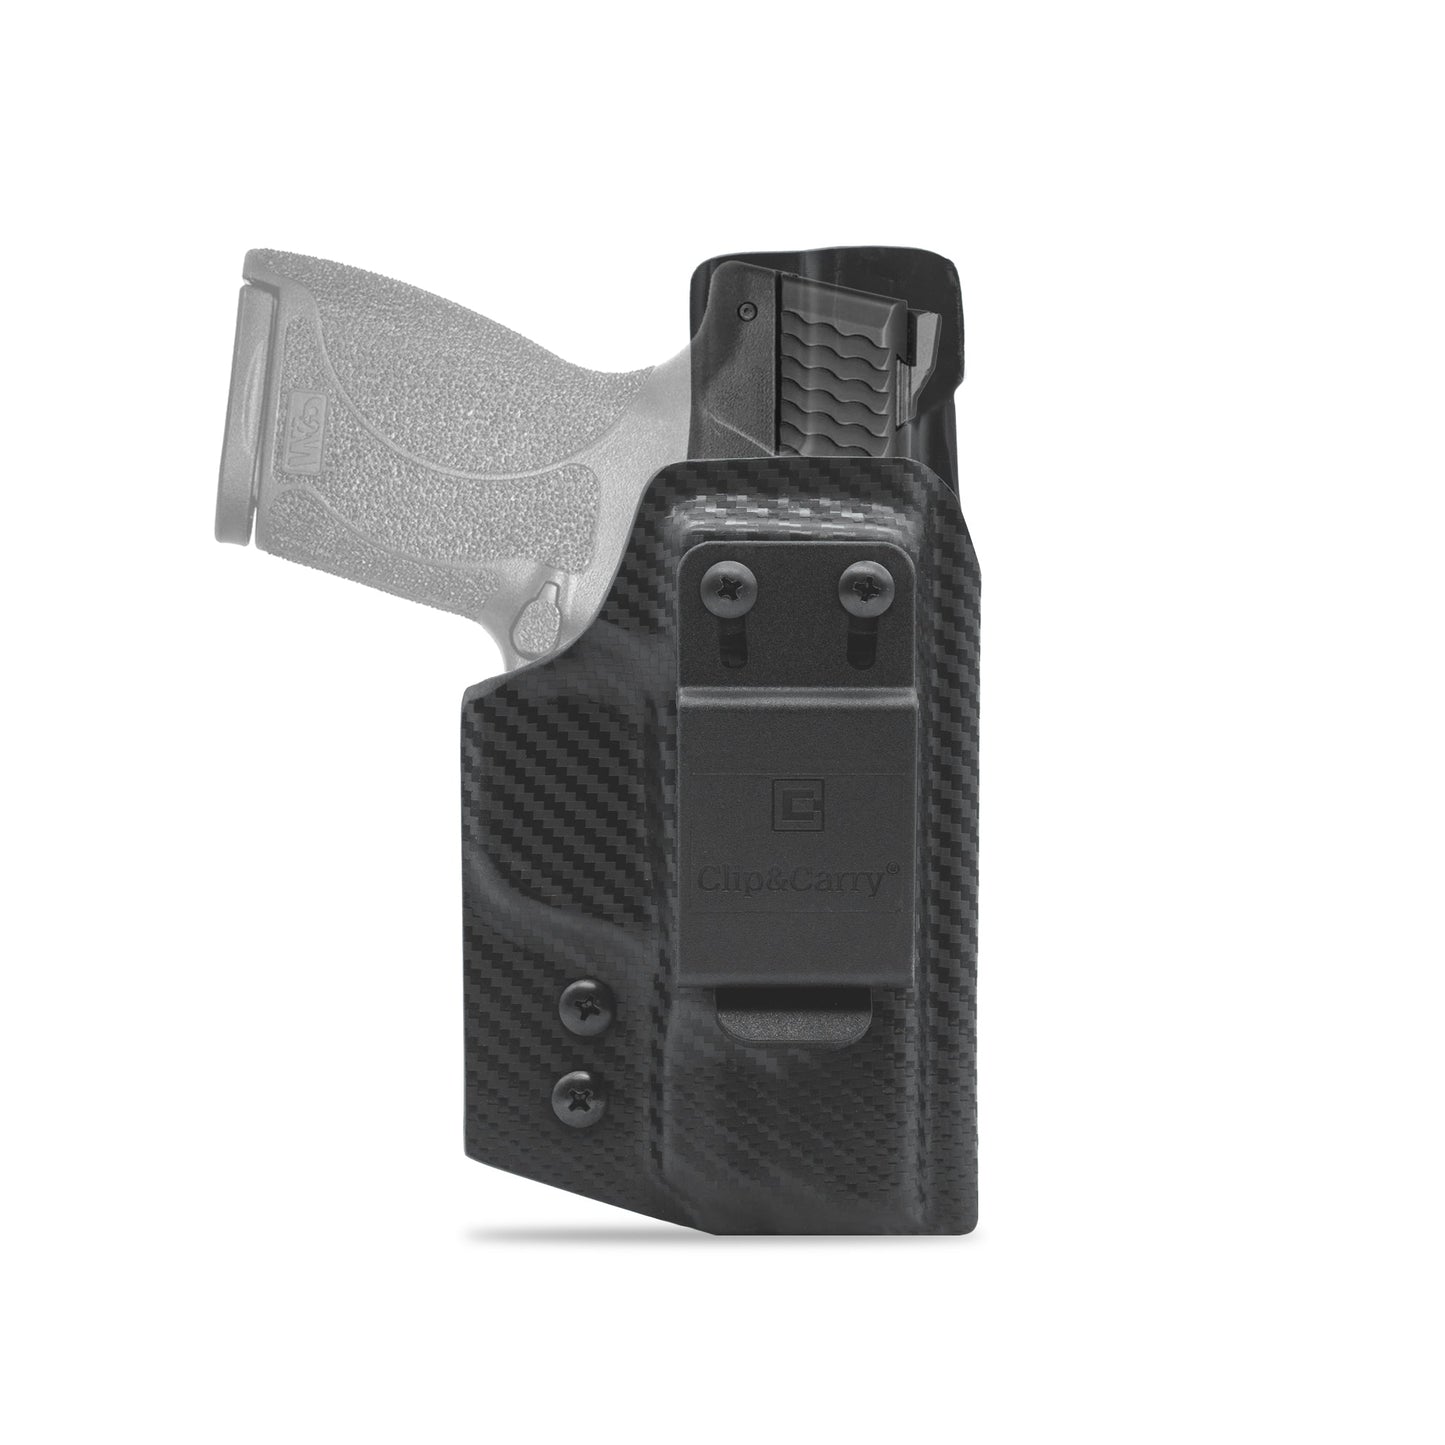 IWB Holster for the Smith & Wesson Shield .45 Clip & Carry